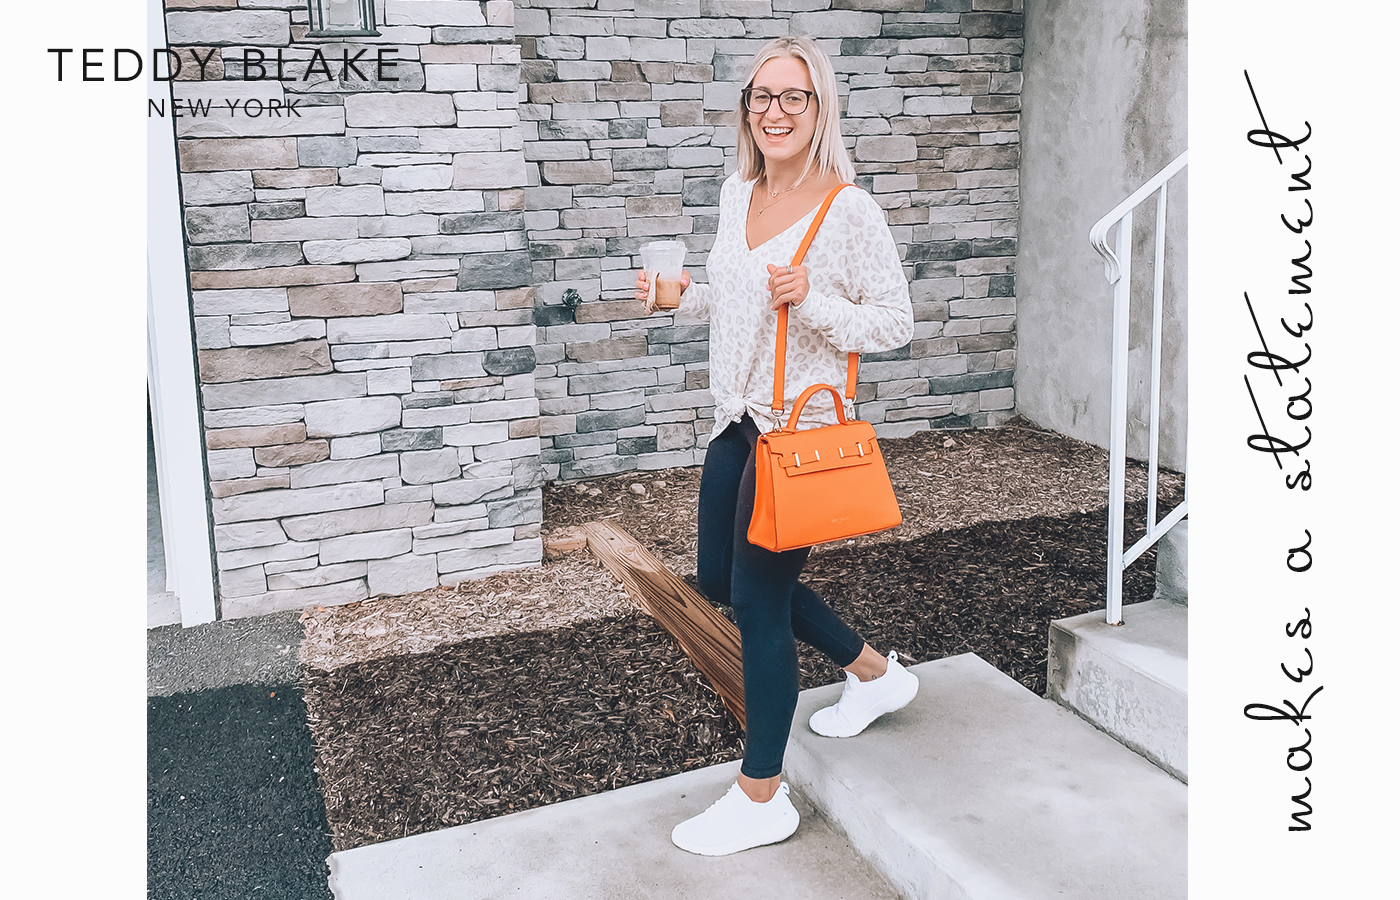 Honest Teddy Blake Bag Review - Ava 9 - Lizzie in Lace